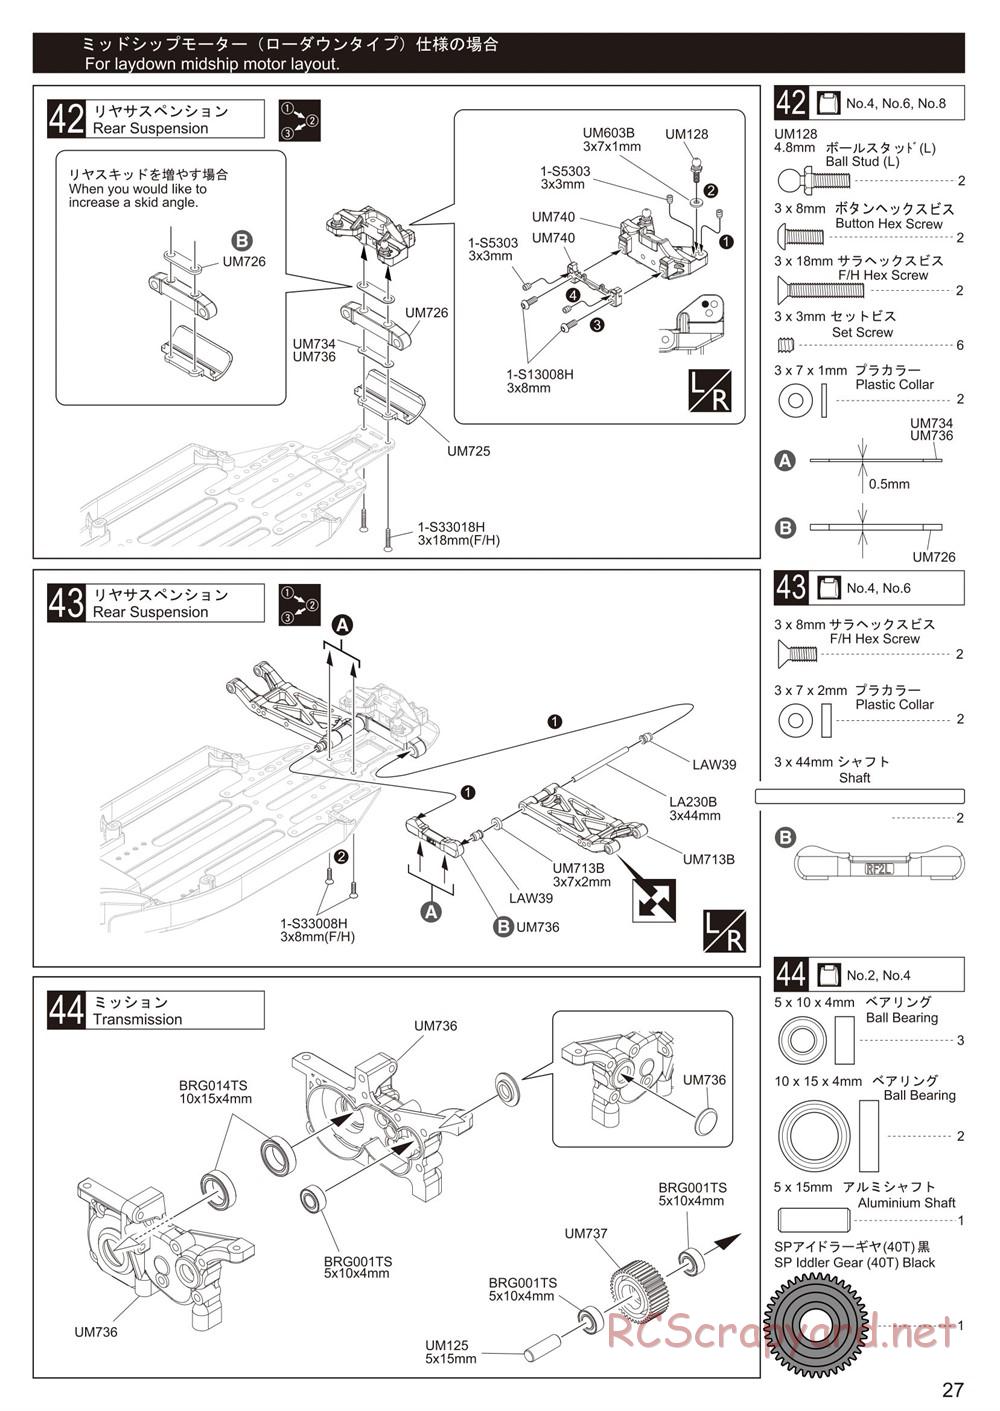 Kyosho - Ultima RB6.6 - Manual - Page 27